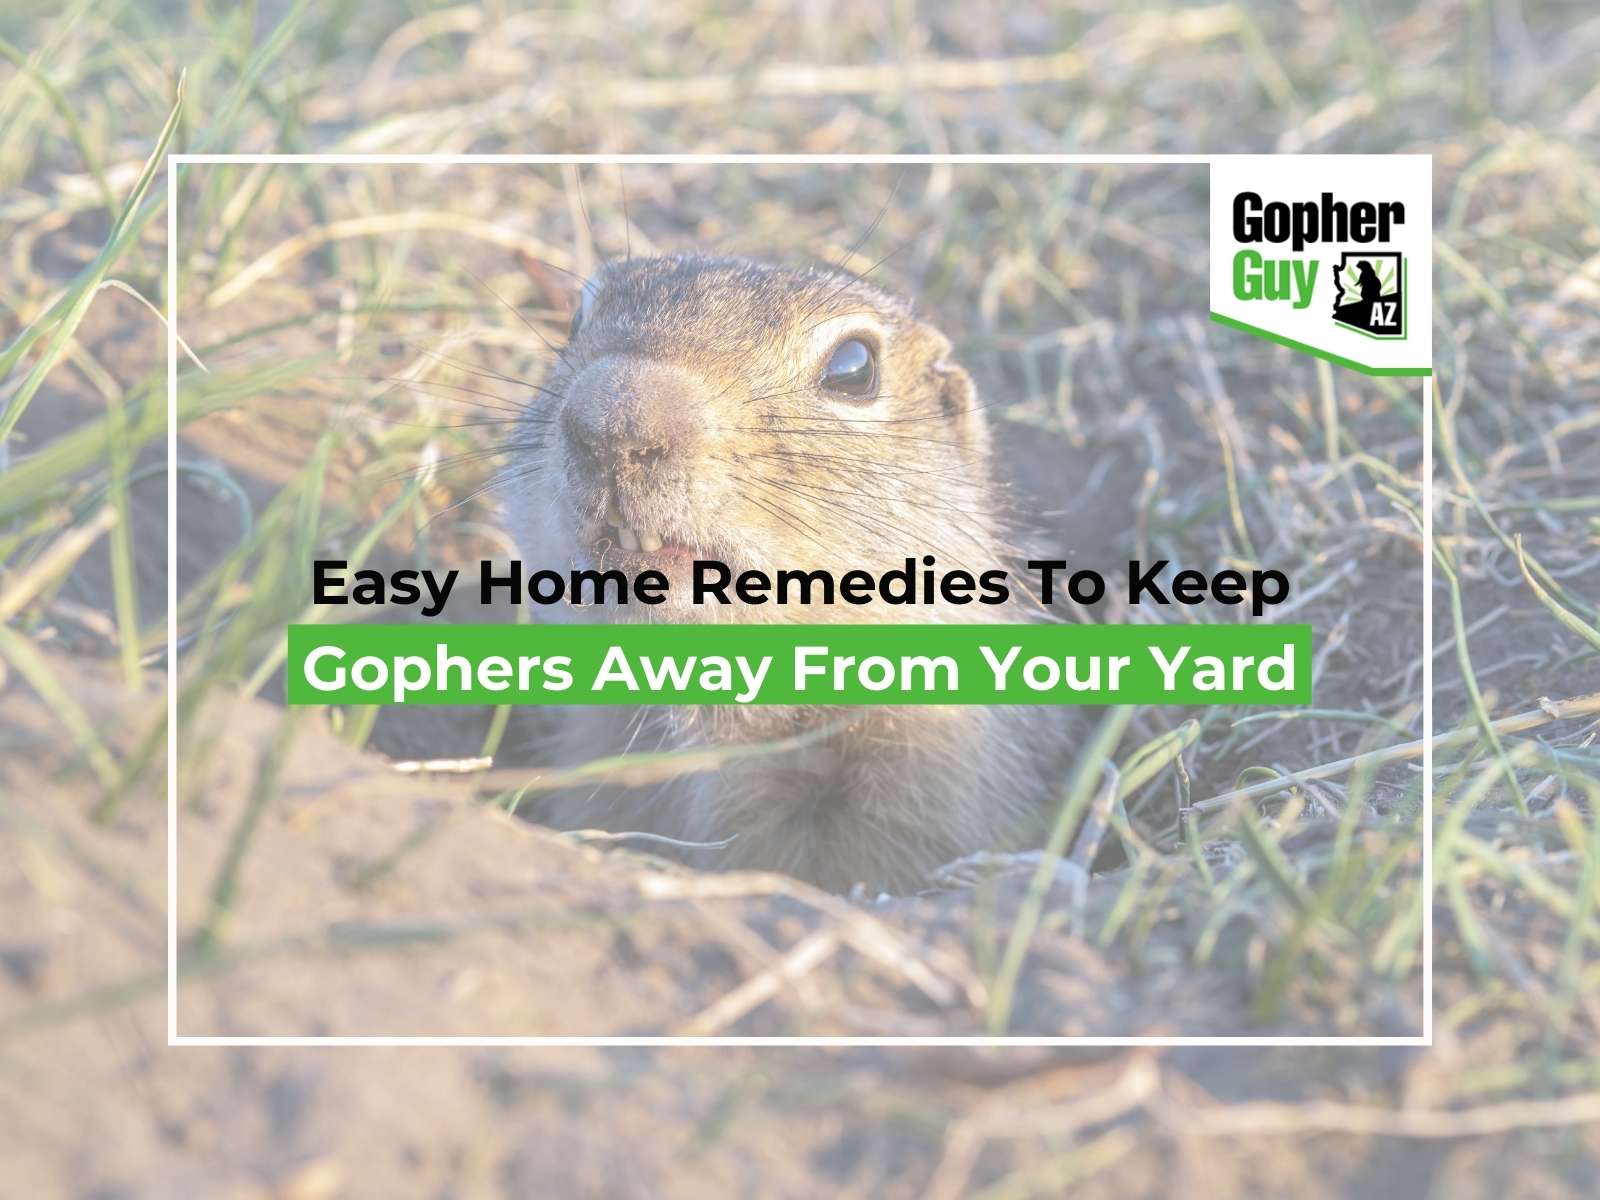 Easy Home Remedies To Keep Gophers Away From Your Yard